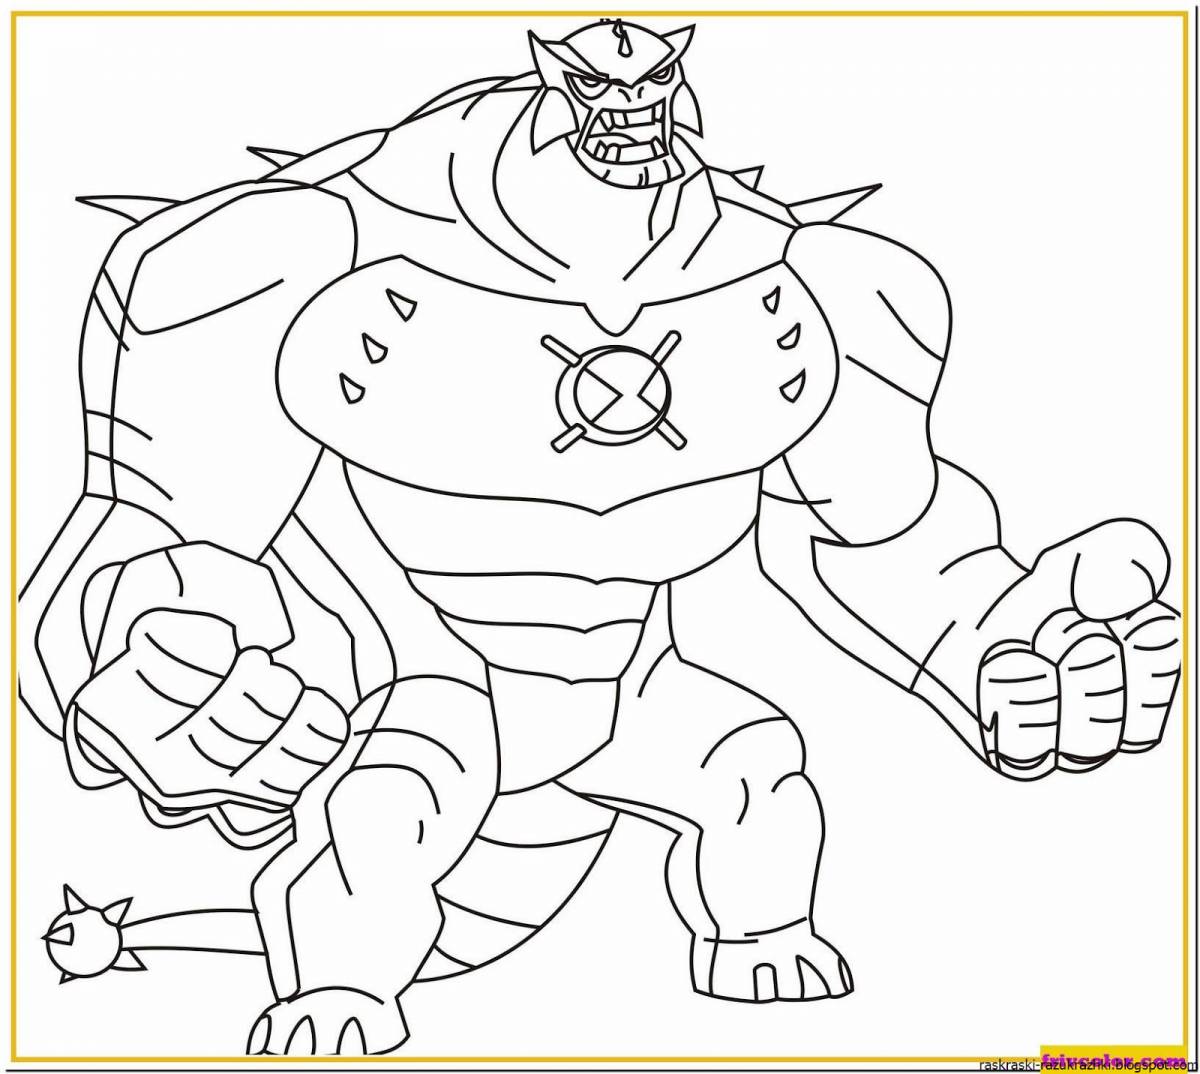 Creative coloring pages for boys